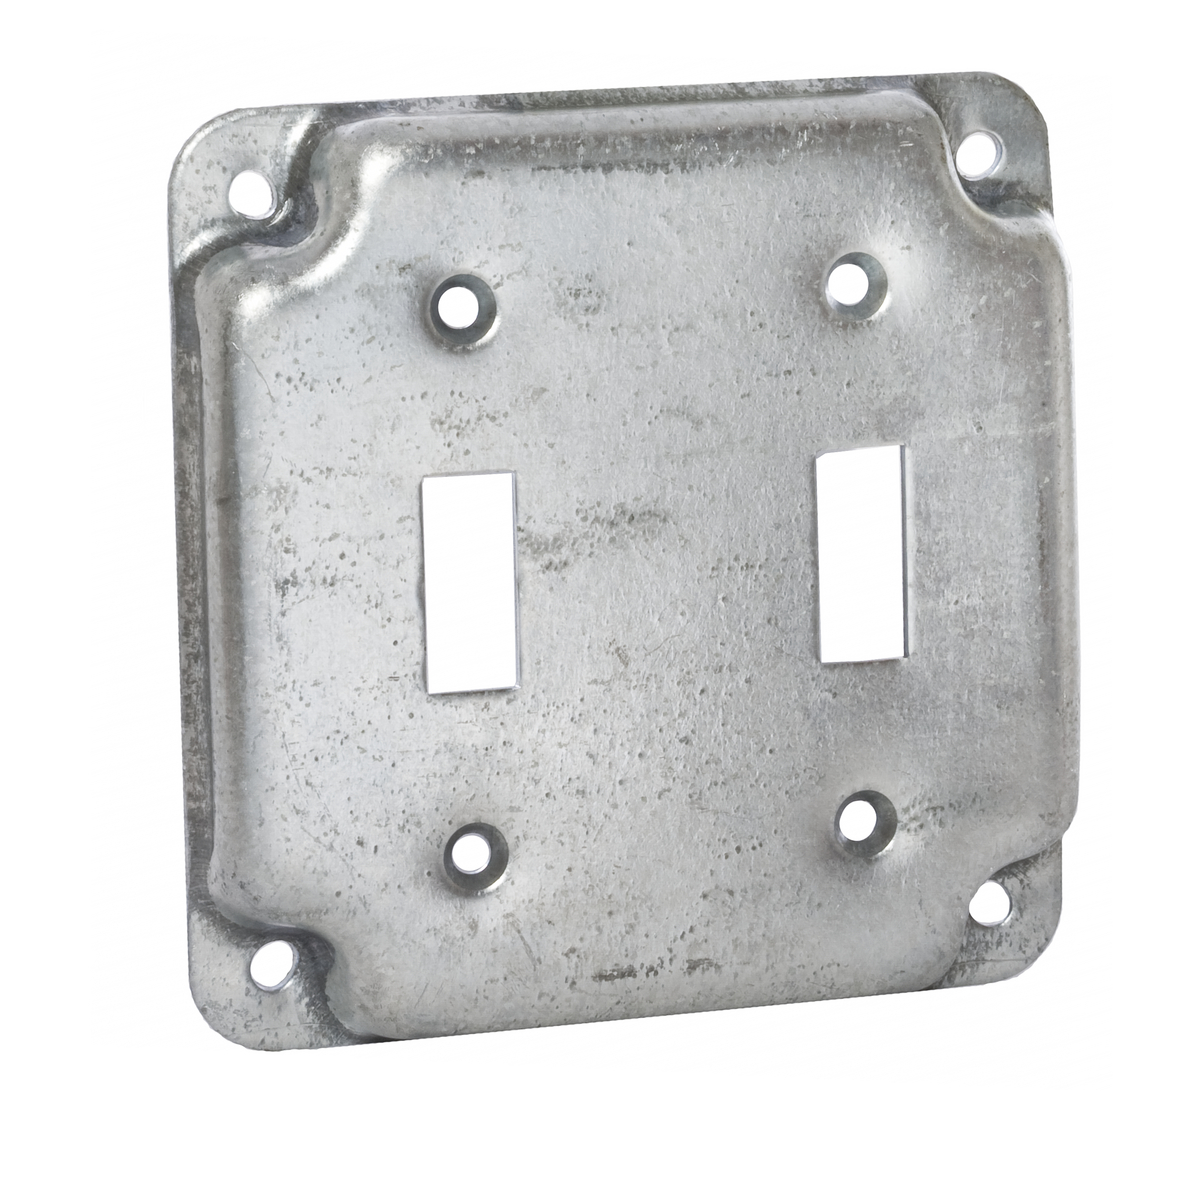 4 In. Square Exposed Work Covers - Raised 1/2 In., 2 Toggle Switches